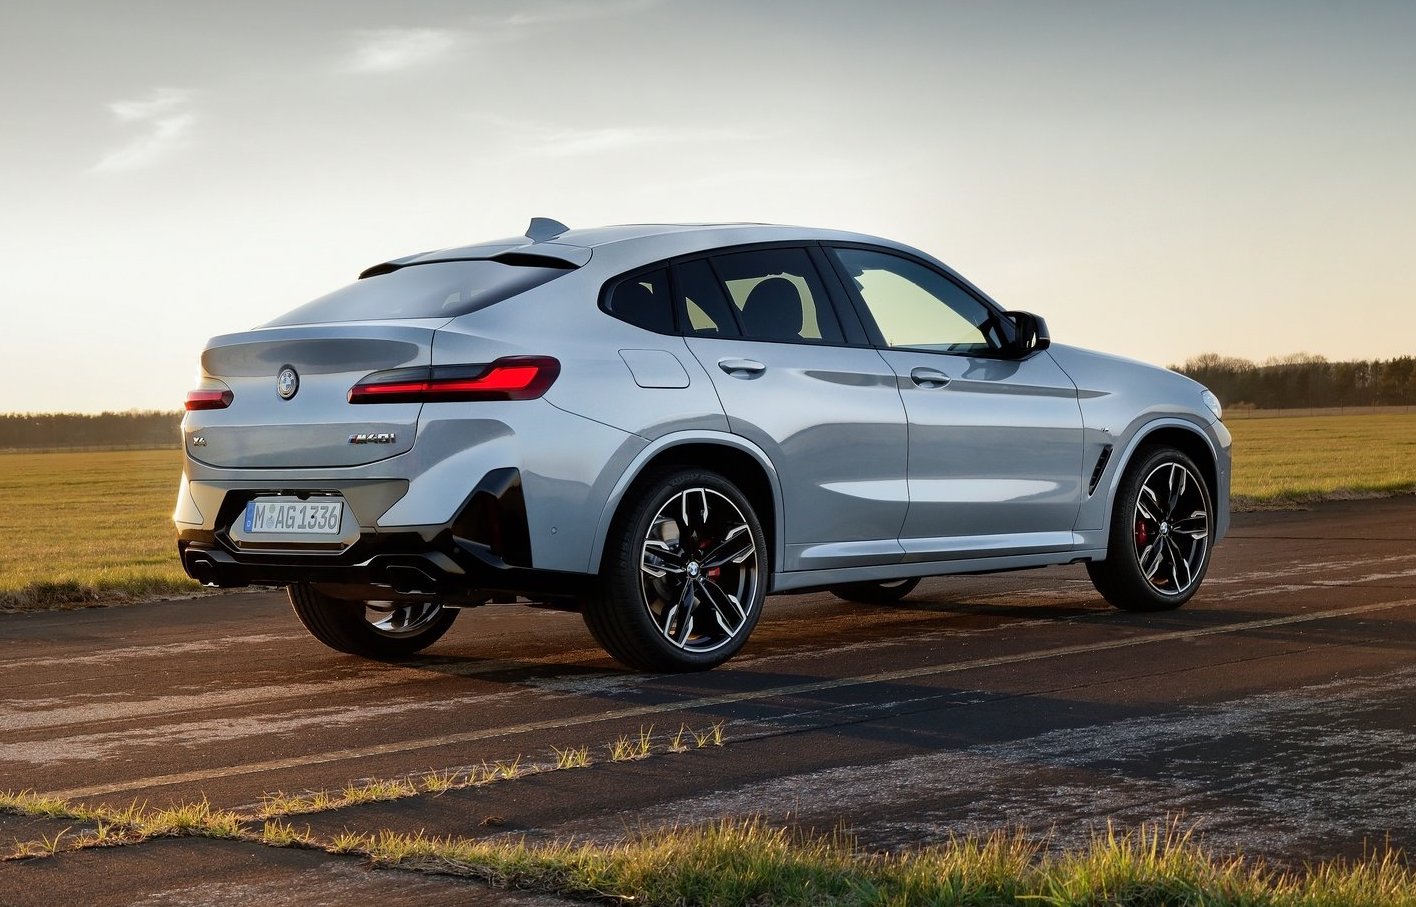 A Black BMW X4 M40i driving on the road